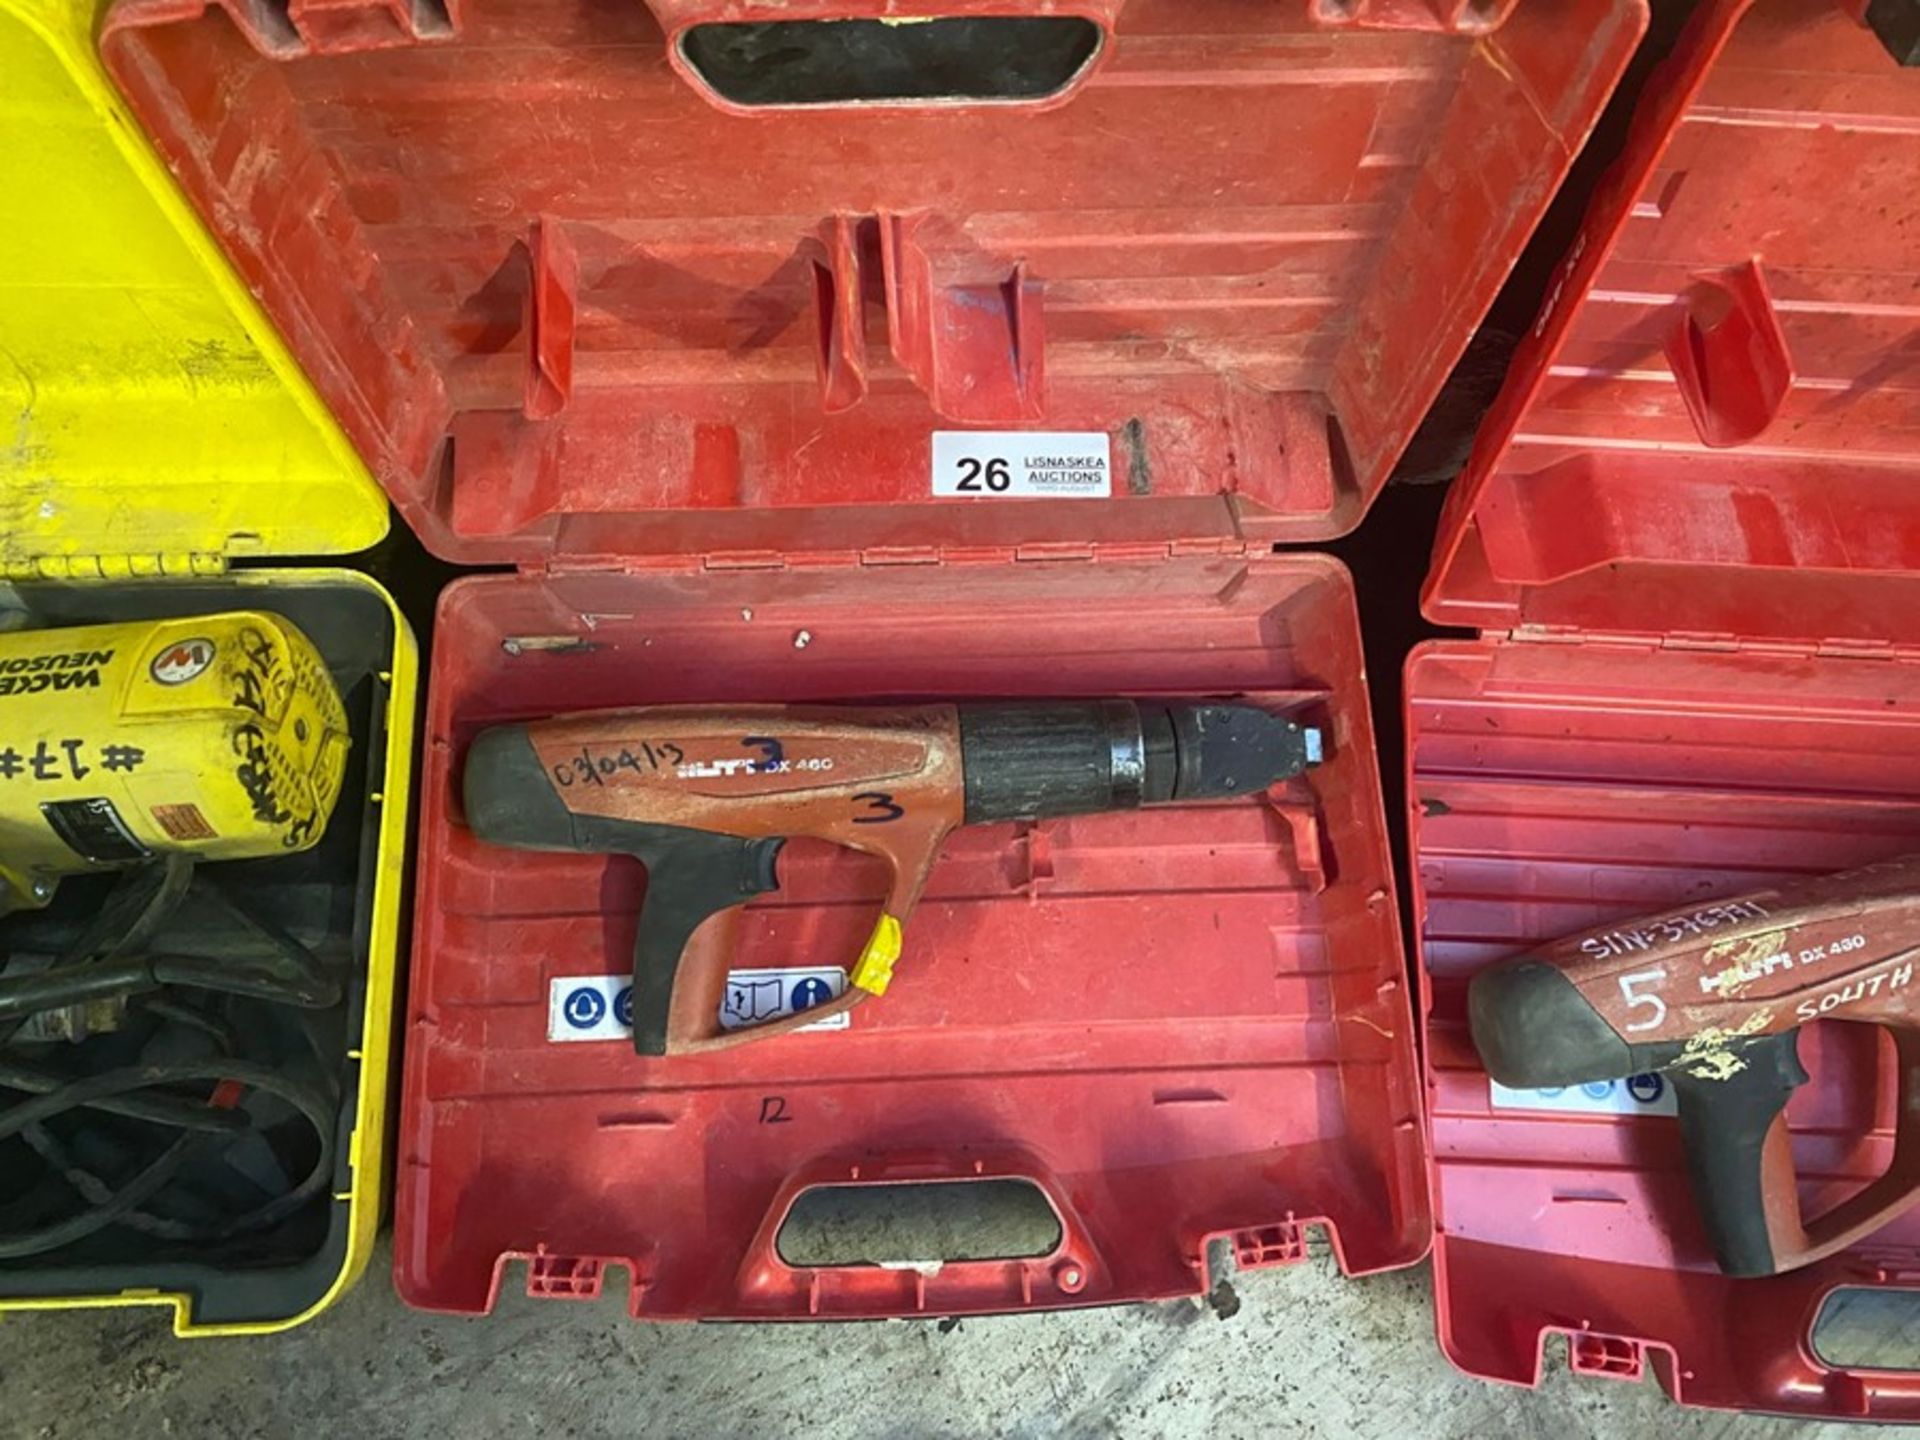 HILTI DX460 POWDER-ACTUATED TOOL (PLUS VAT ON ITEM) (WORKING) - Image 2 of 2